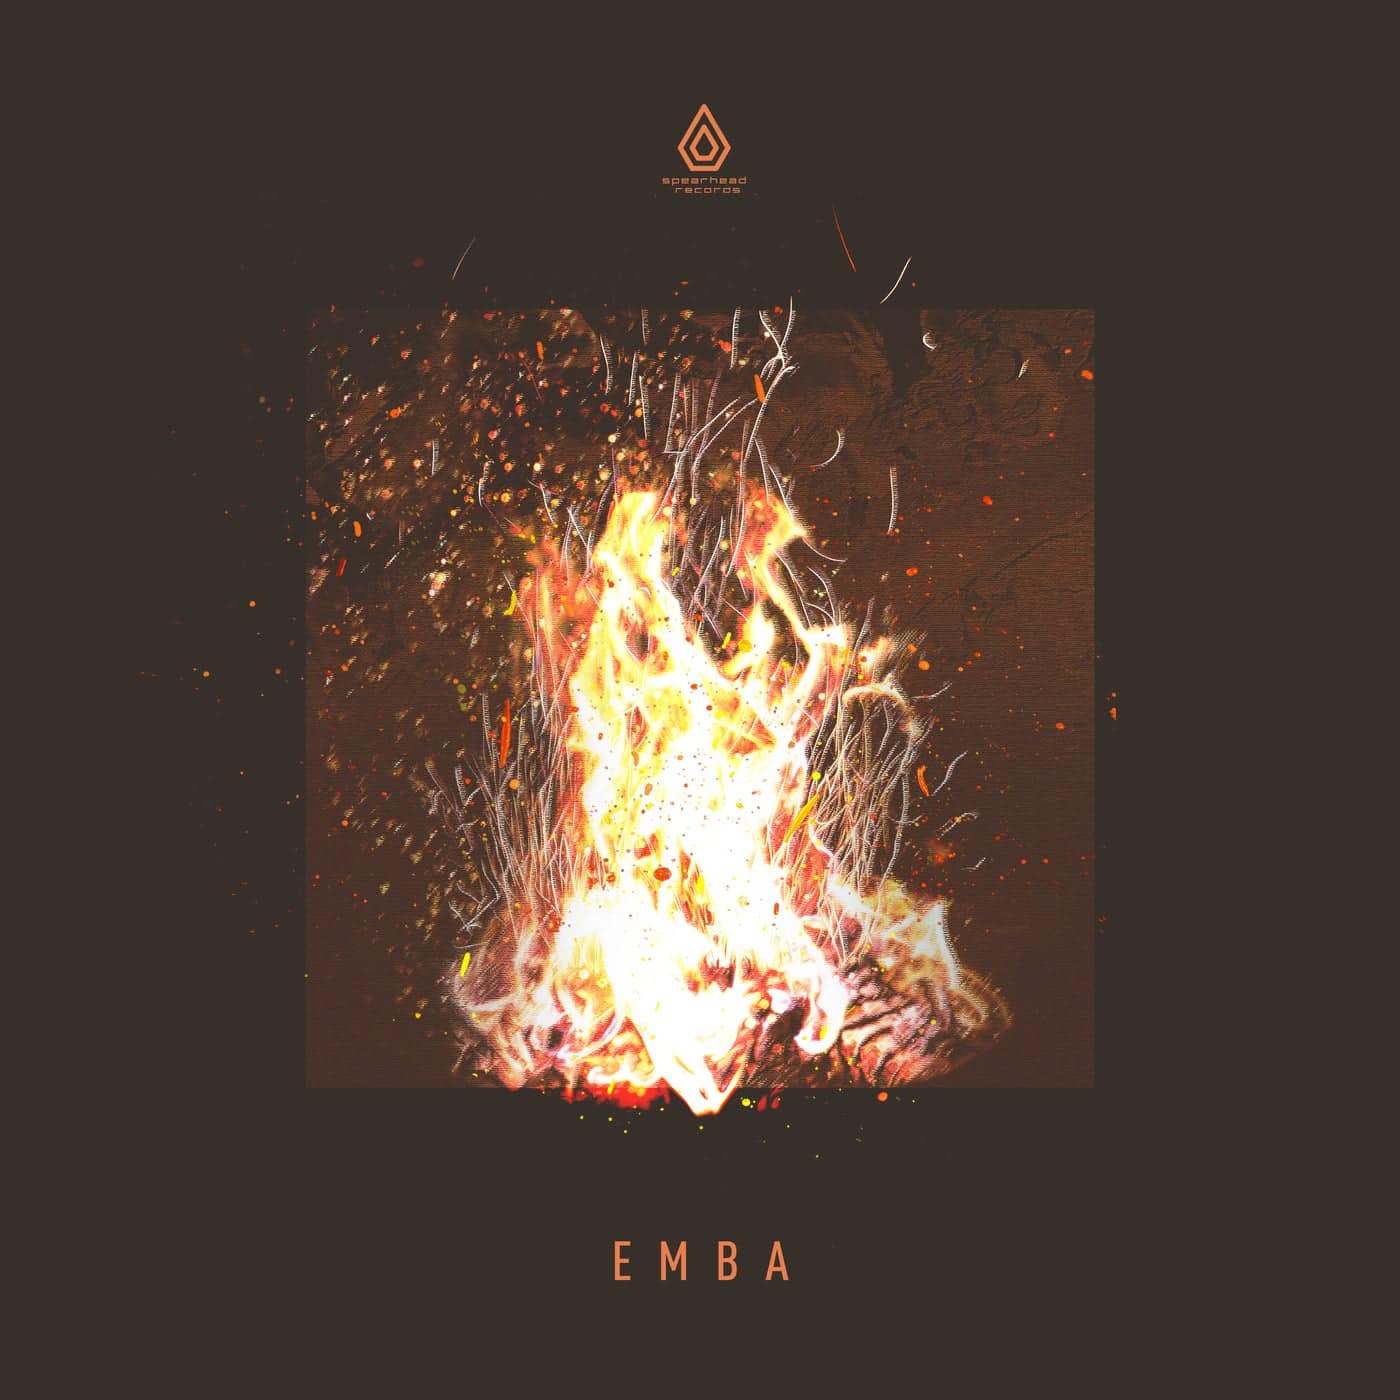 Download Emba on Electrobuzz